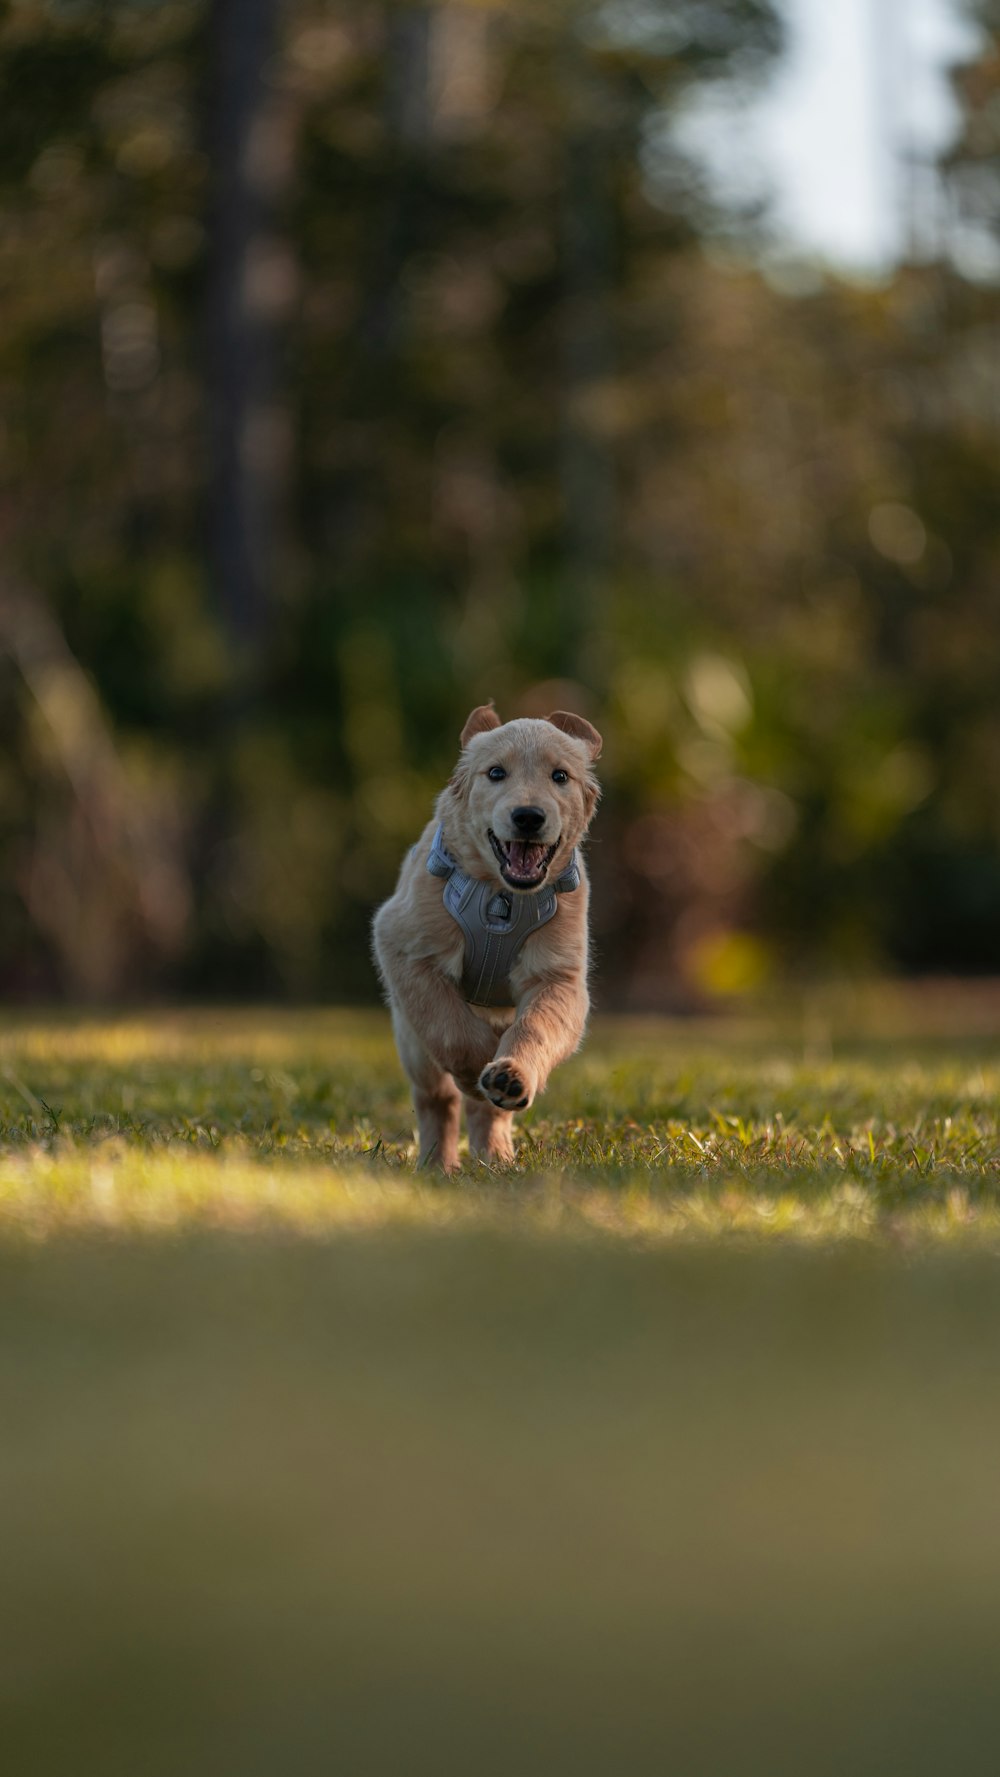 a dog running in a field with trees in the background